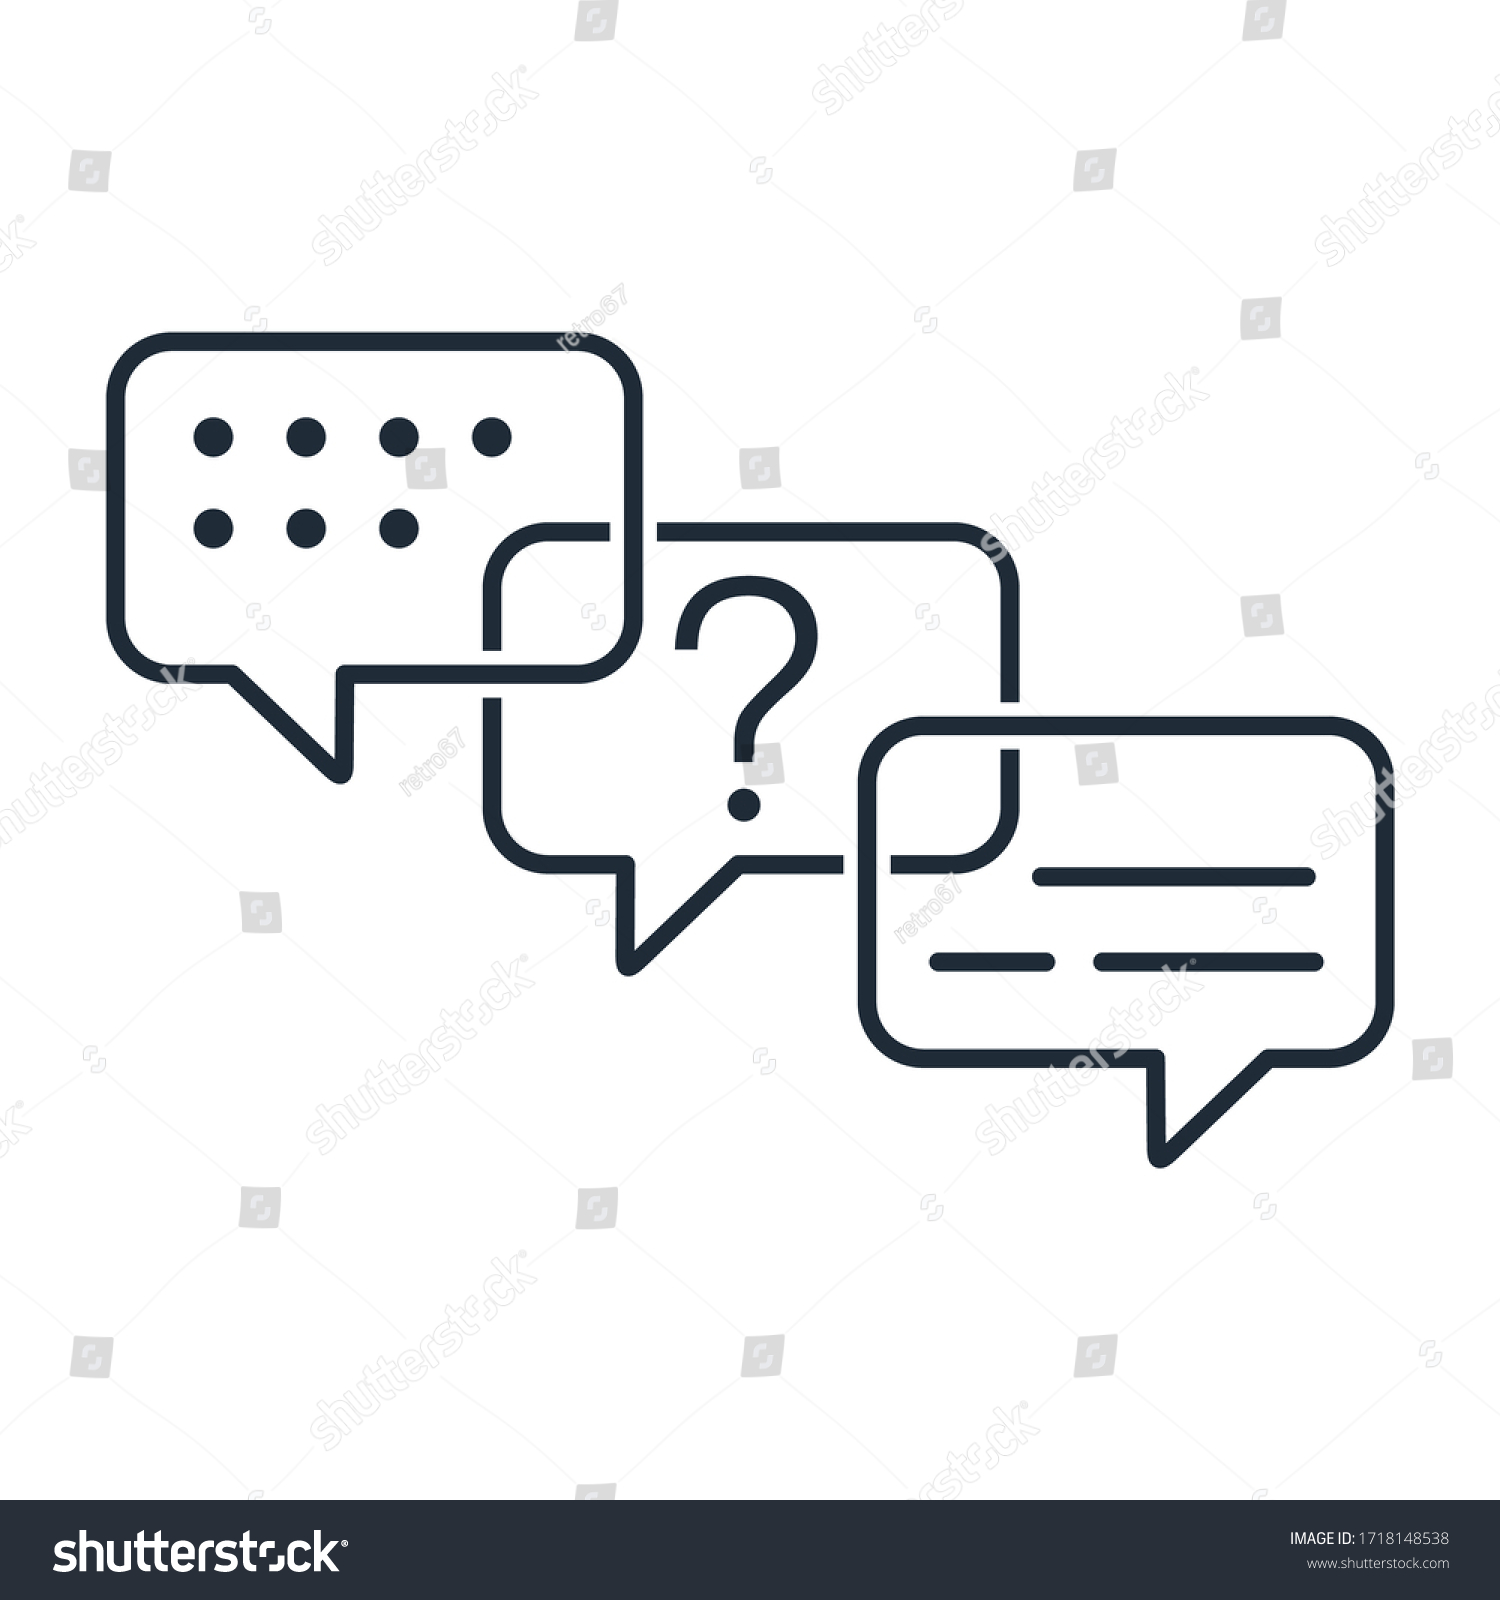 SVG of Group discussion of the issue. Vector linear icon isolated on white background. svg